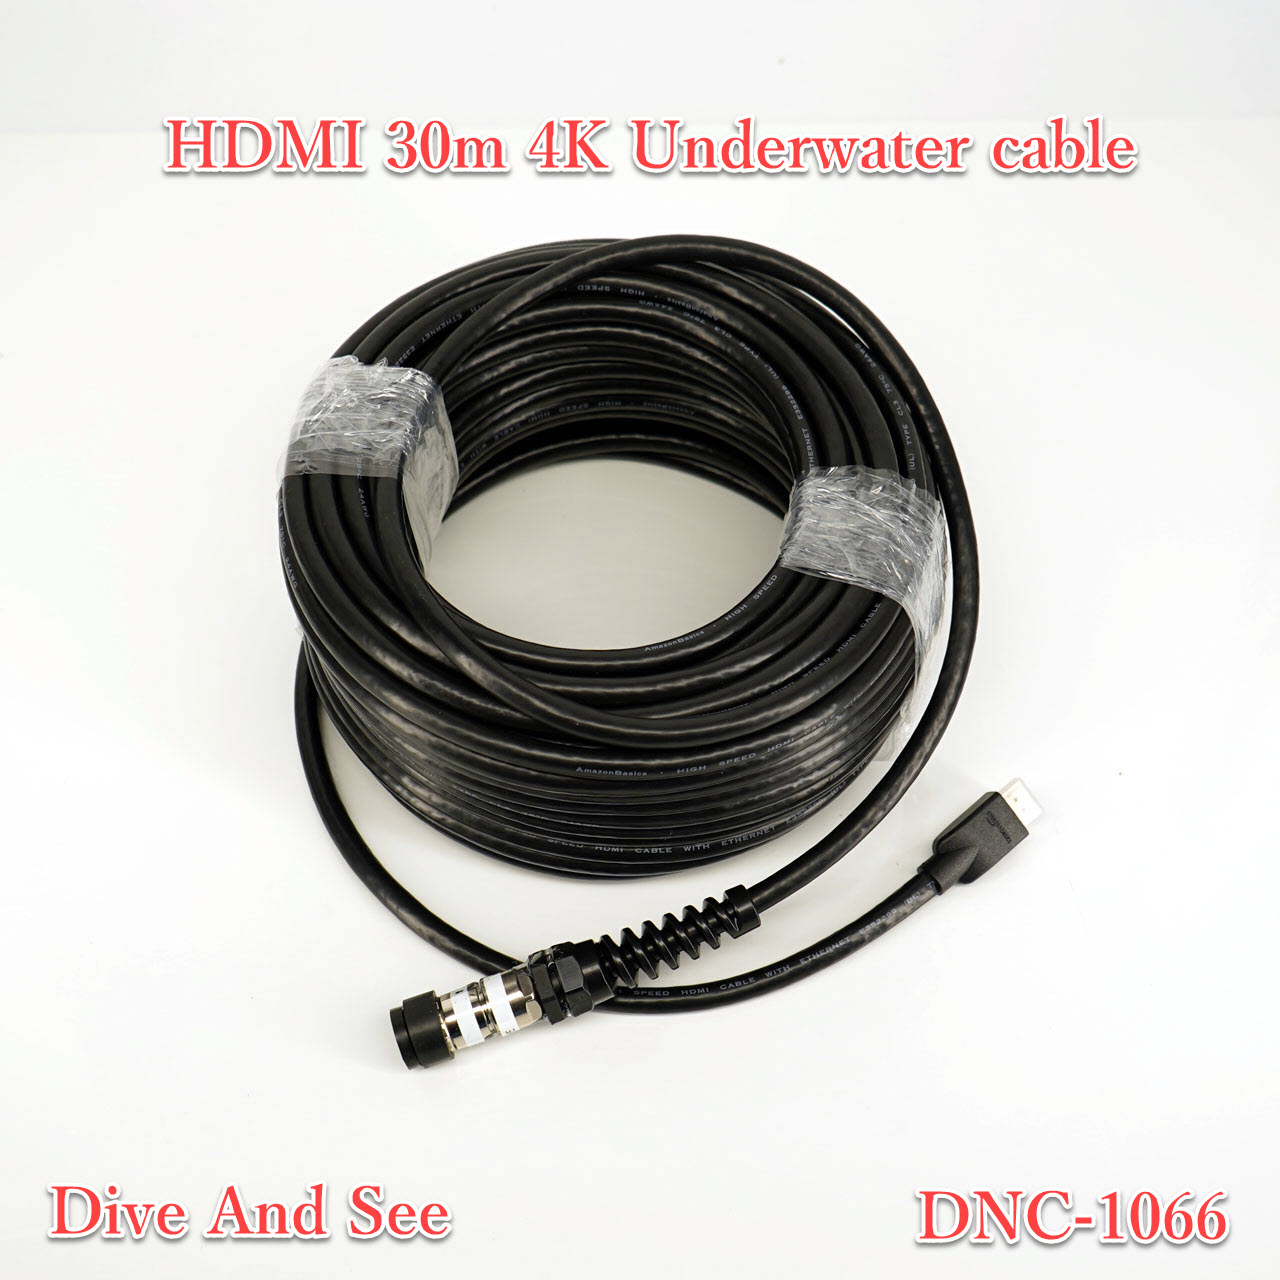 DNC-1066 HDMI 30m cable for Live video, support 4Kp24